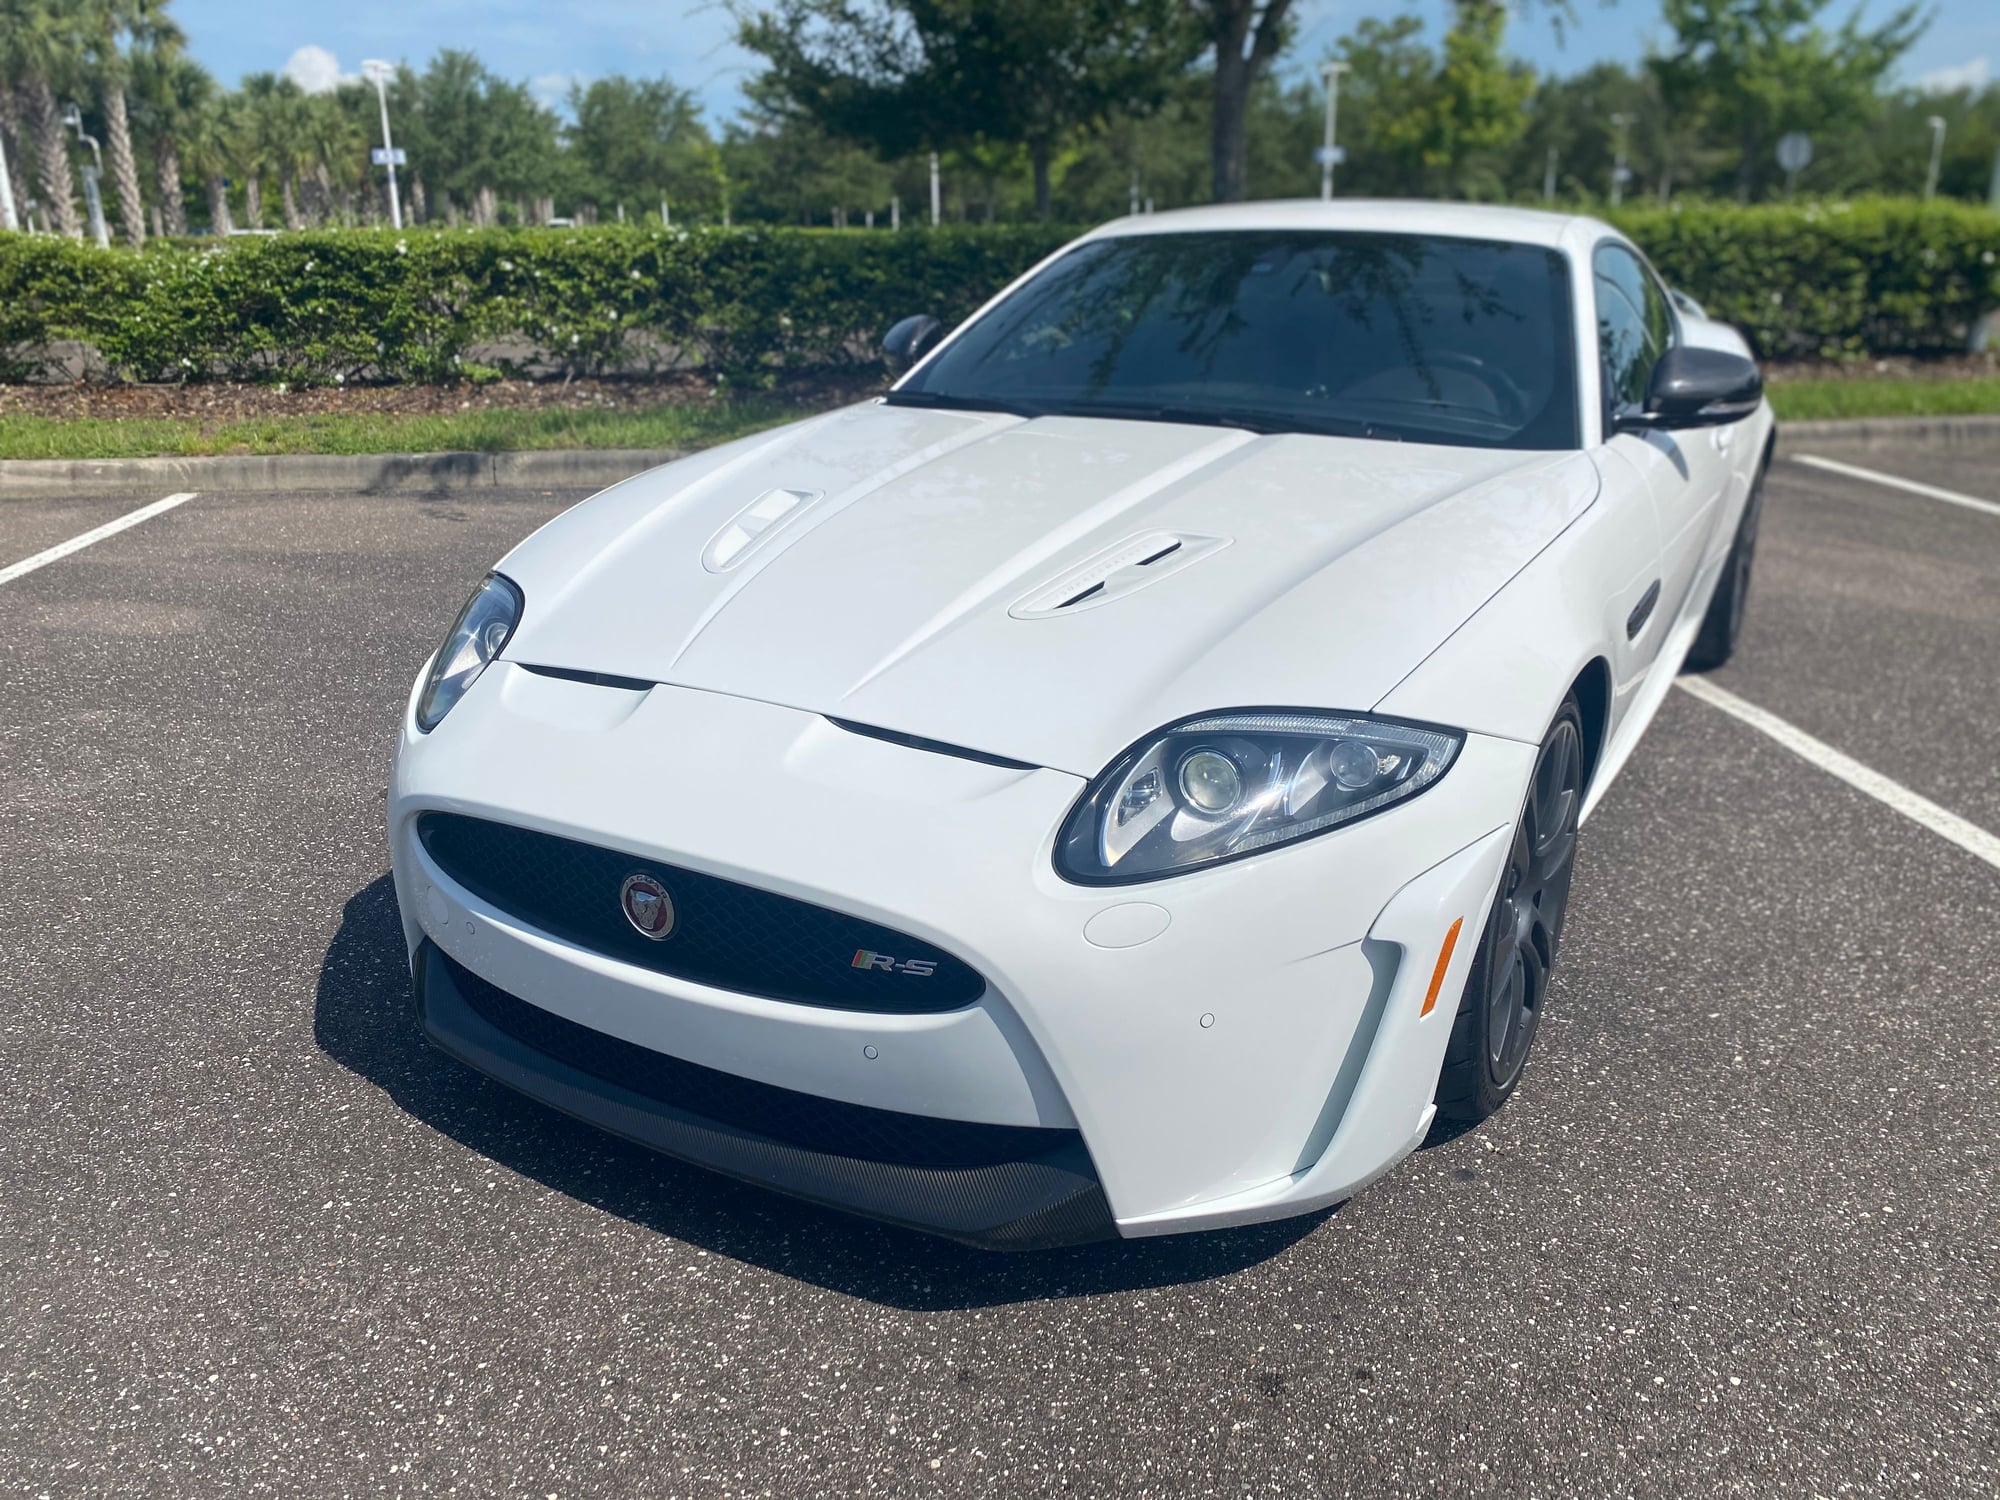 2013 Jaguar XKR-S - immaculate 2013 Jaguar XKR-S - Used - VIN SAJWA4HAXDMB49613 - 39,970 Miles - 2WD - Automatic - Coupe - White - Tampa, FL 33618, United States